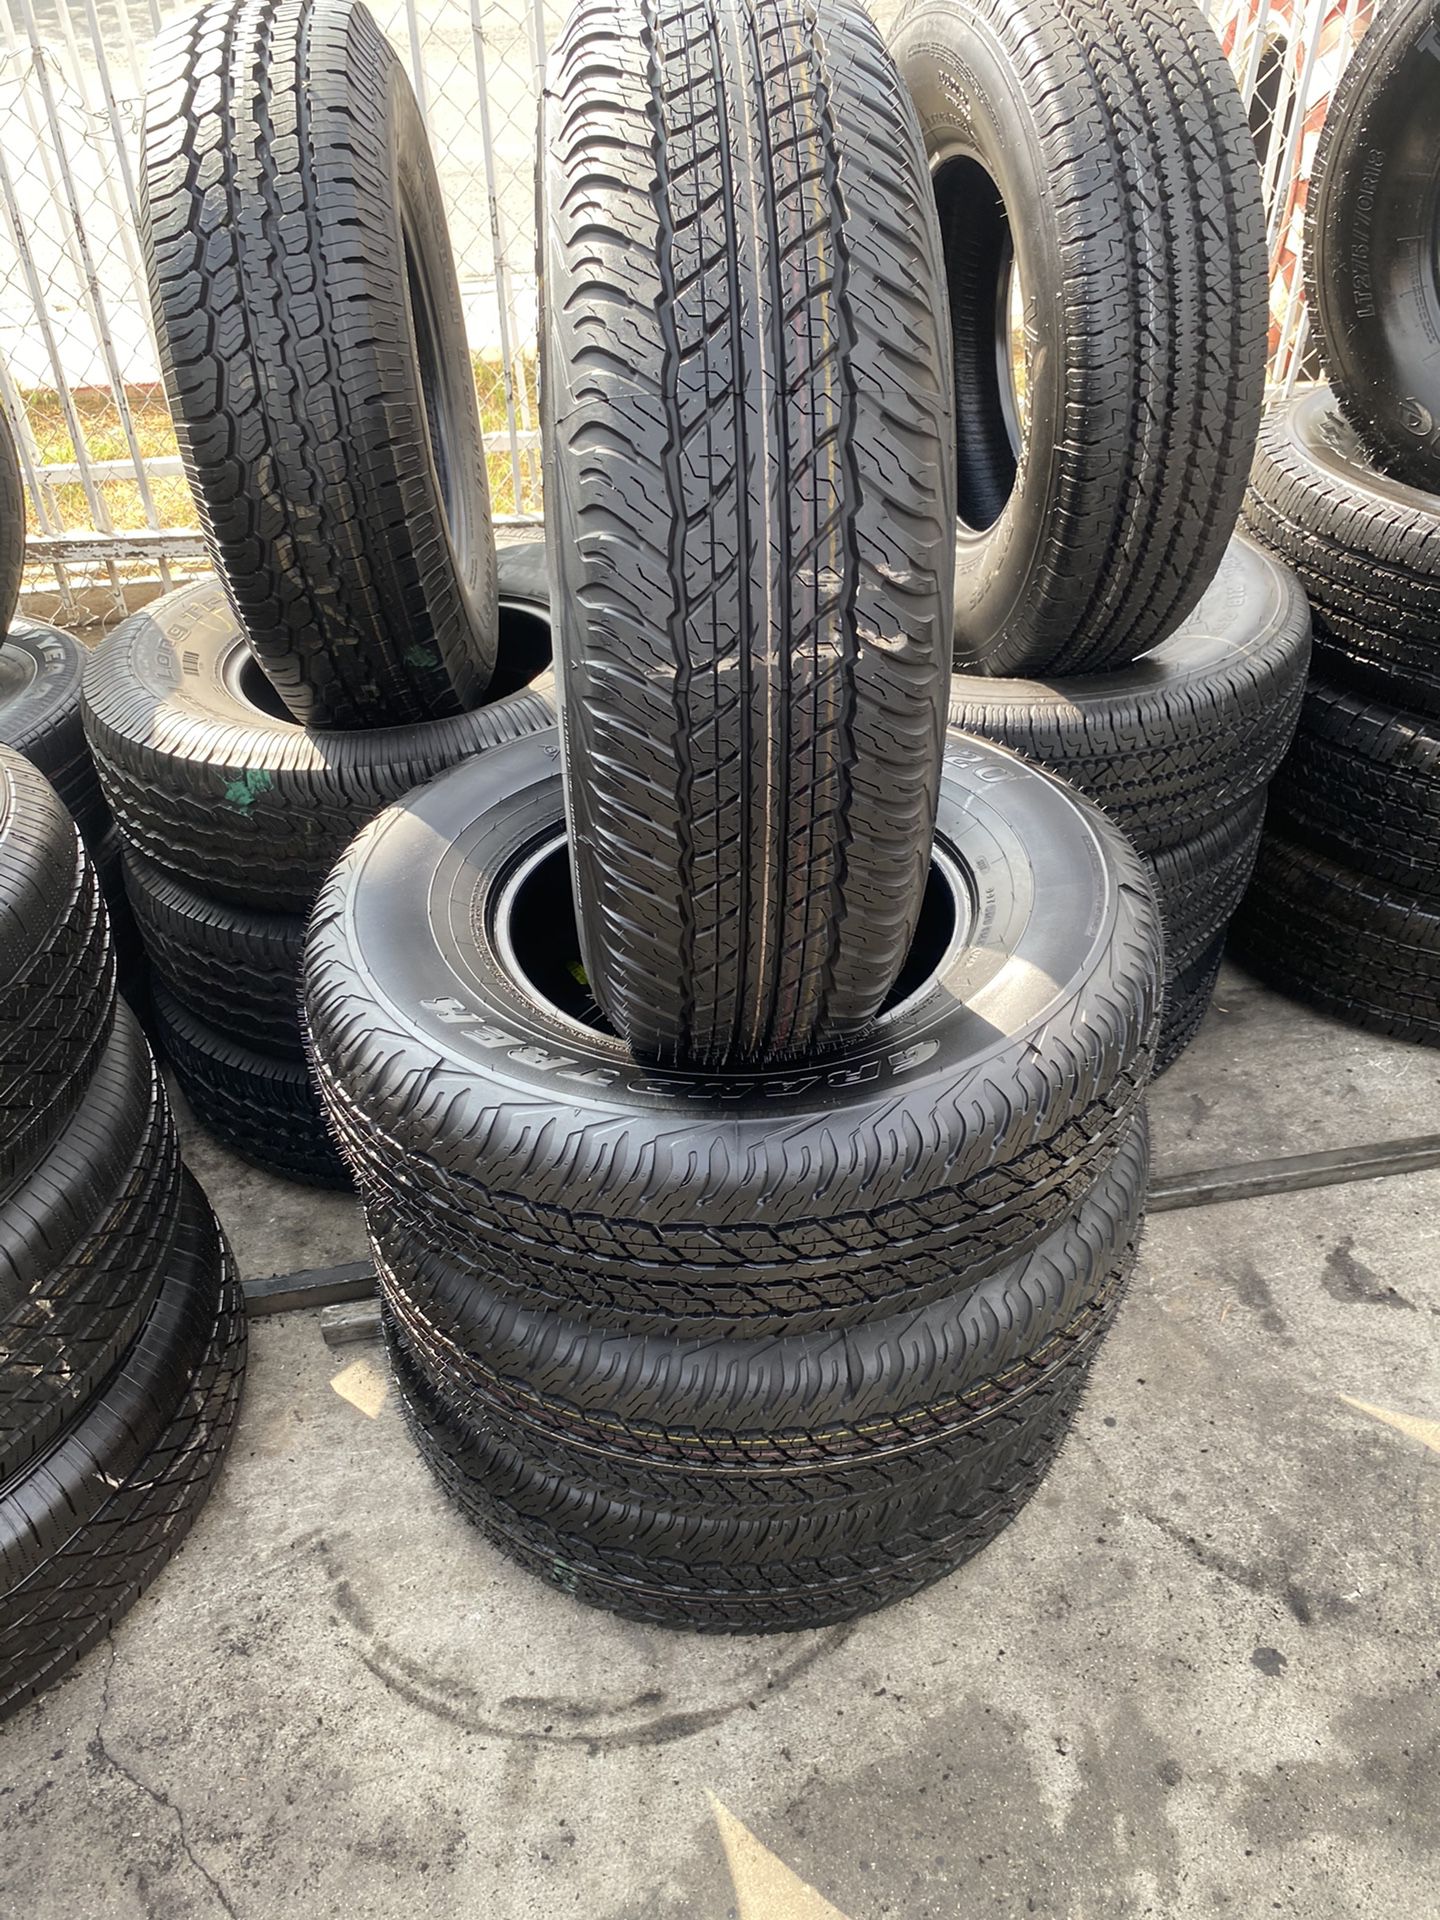 SET 245/75/16 DUNLOP SEMI NEW 95%TREAD LIFE $250 PRICE INCLUDES PROFESSIONAL INSTALLATION AND TAX